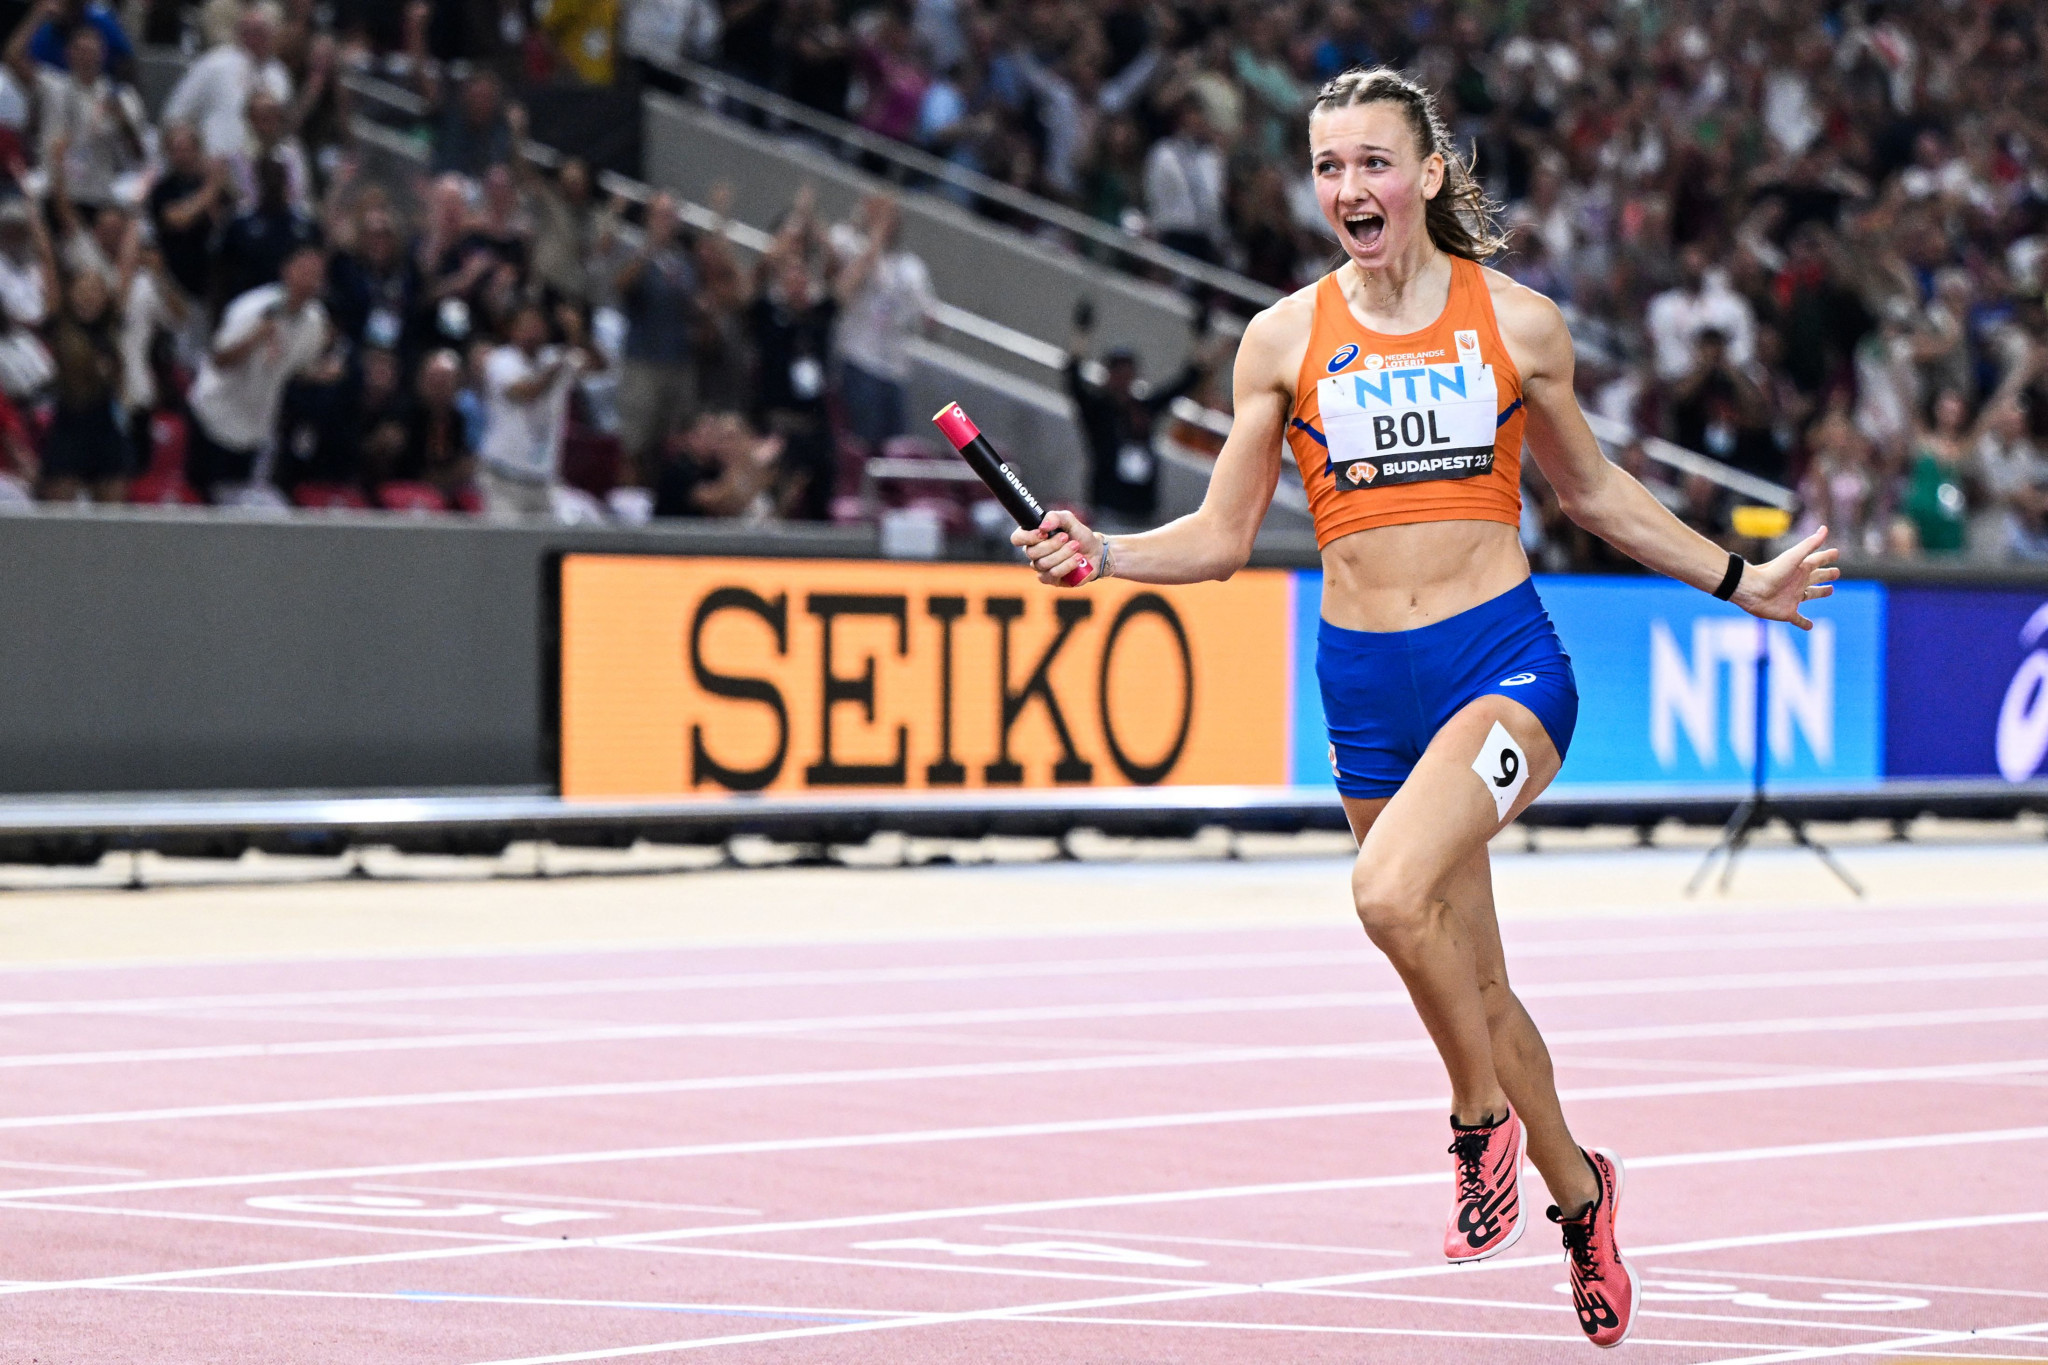 Femke Bol produced a stunning anchor leg to win women's 4x400m relay gold for The Netherlands ©Getty Images